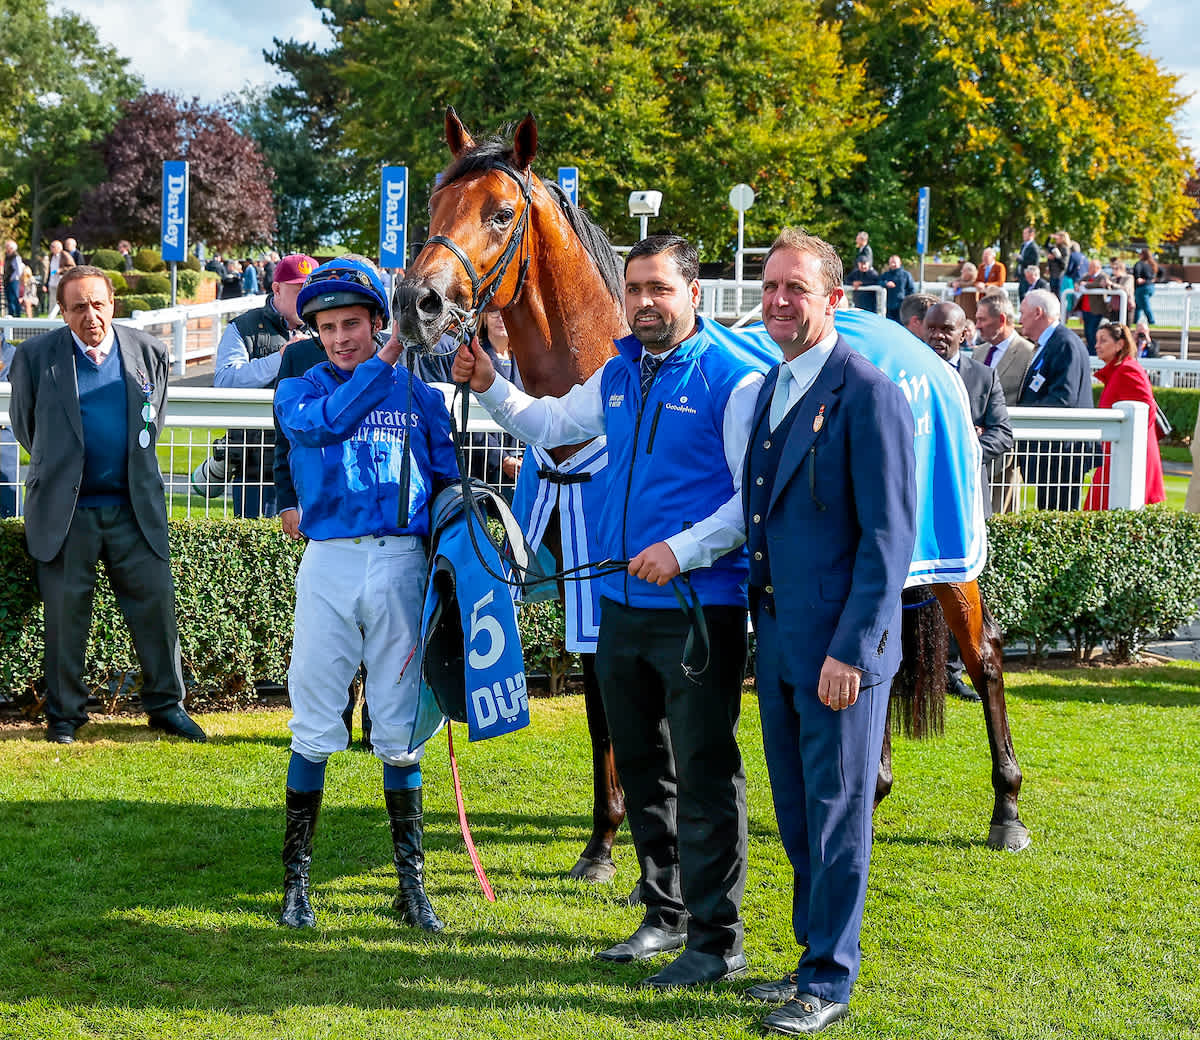 Flying Honours and Silver Knott on target for Godolphin team